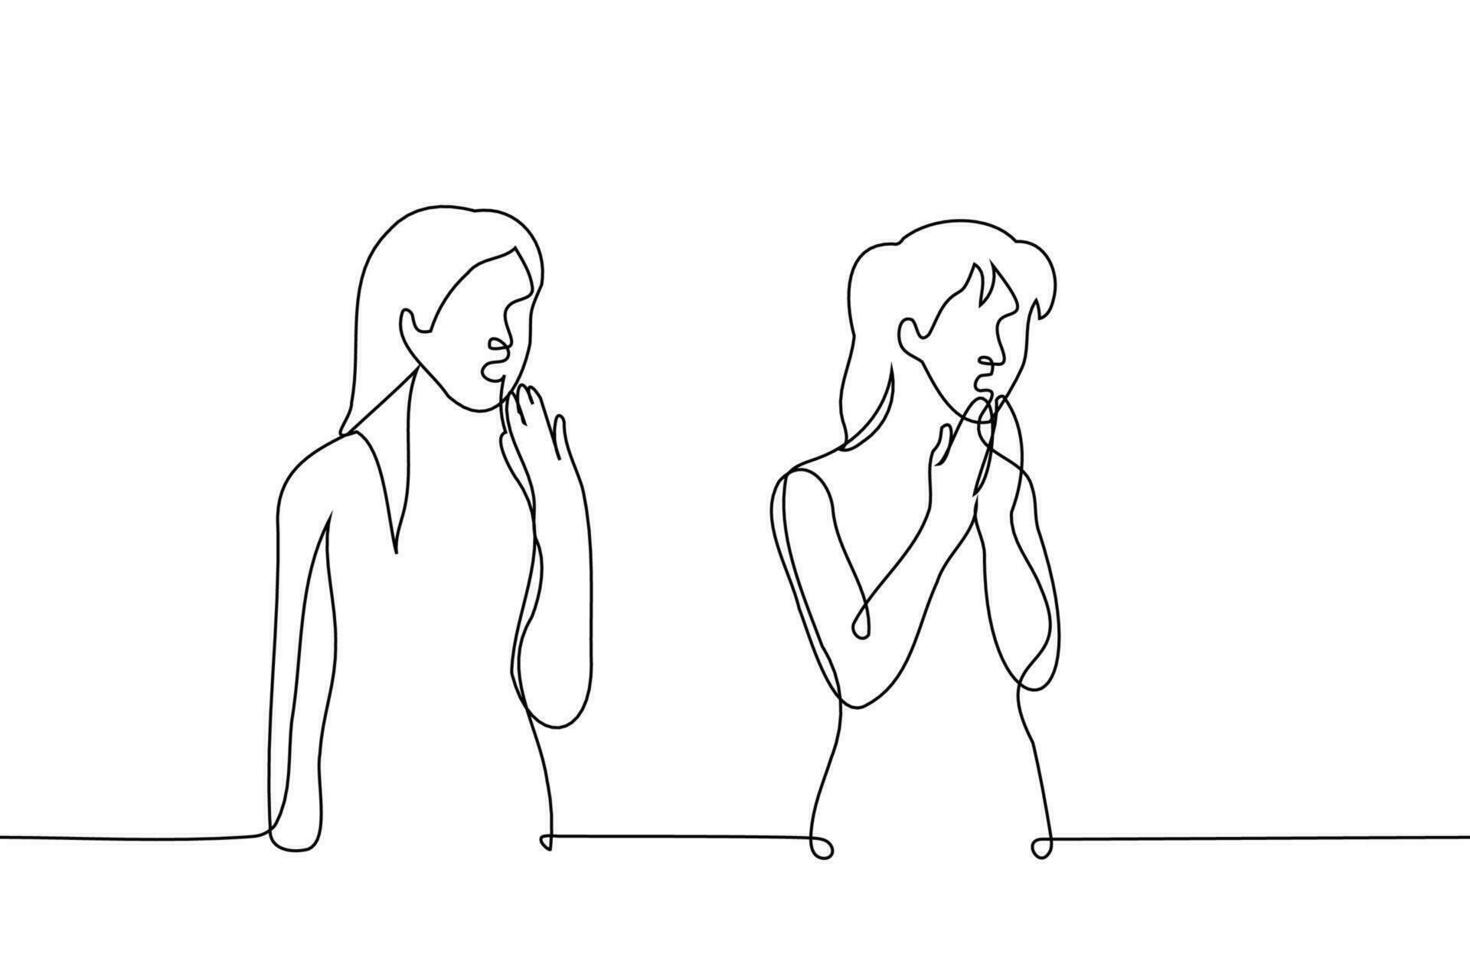 women stand in shock with open mouths - one line art vector. concept innocent, prude, listening to insults, seeing something outrageous vector